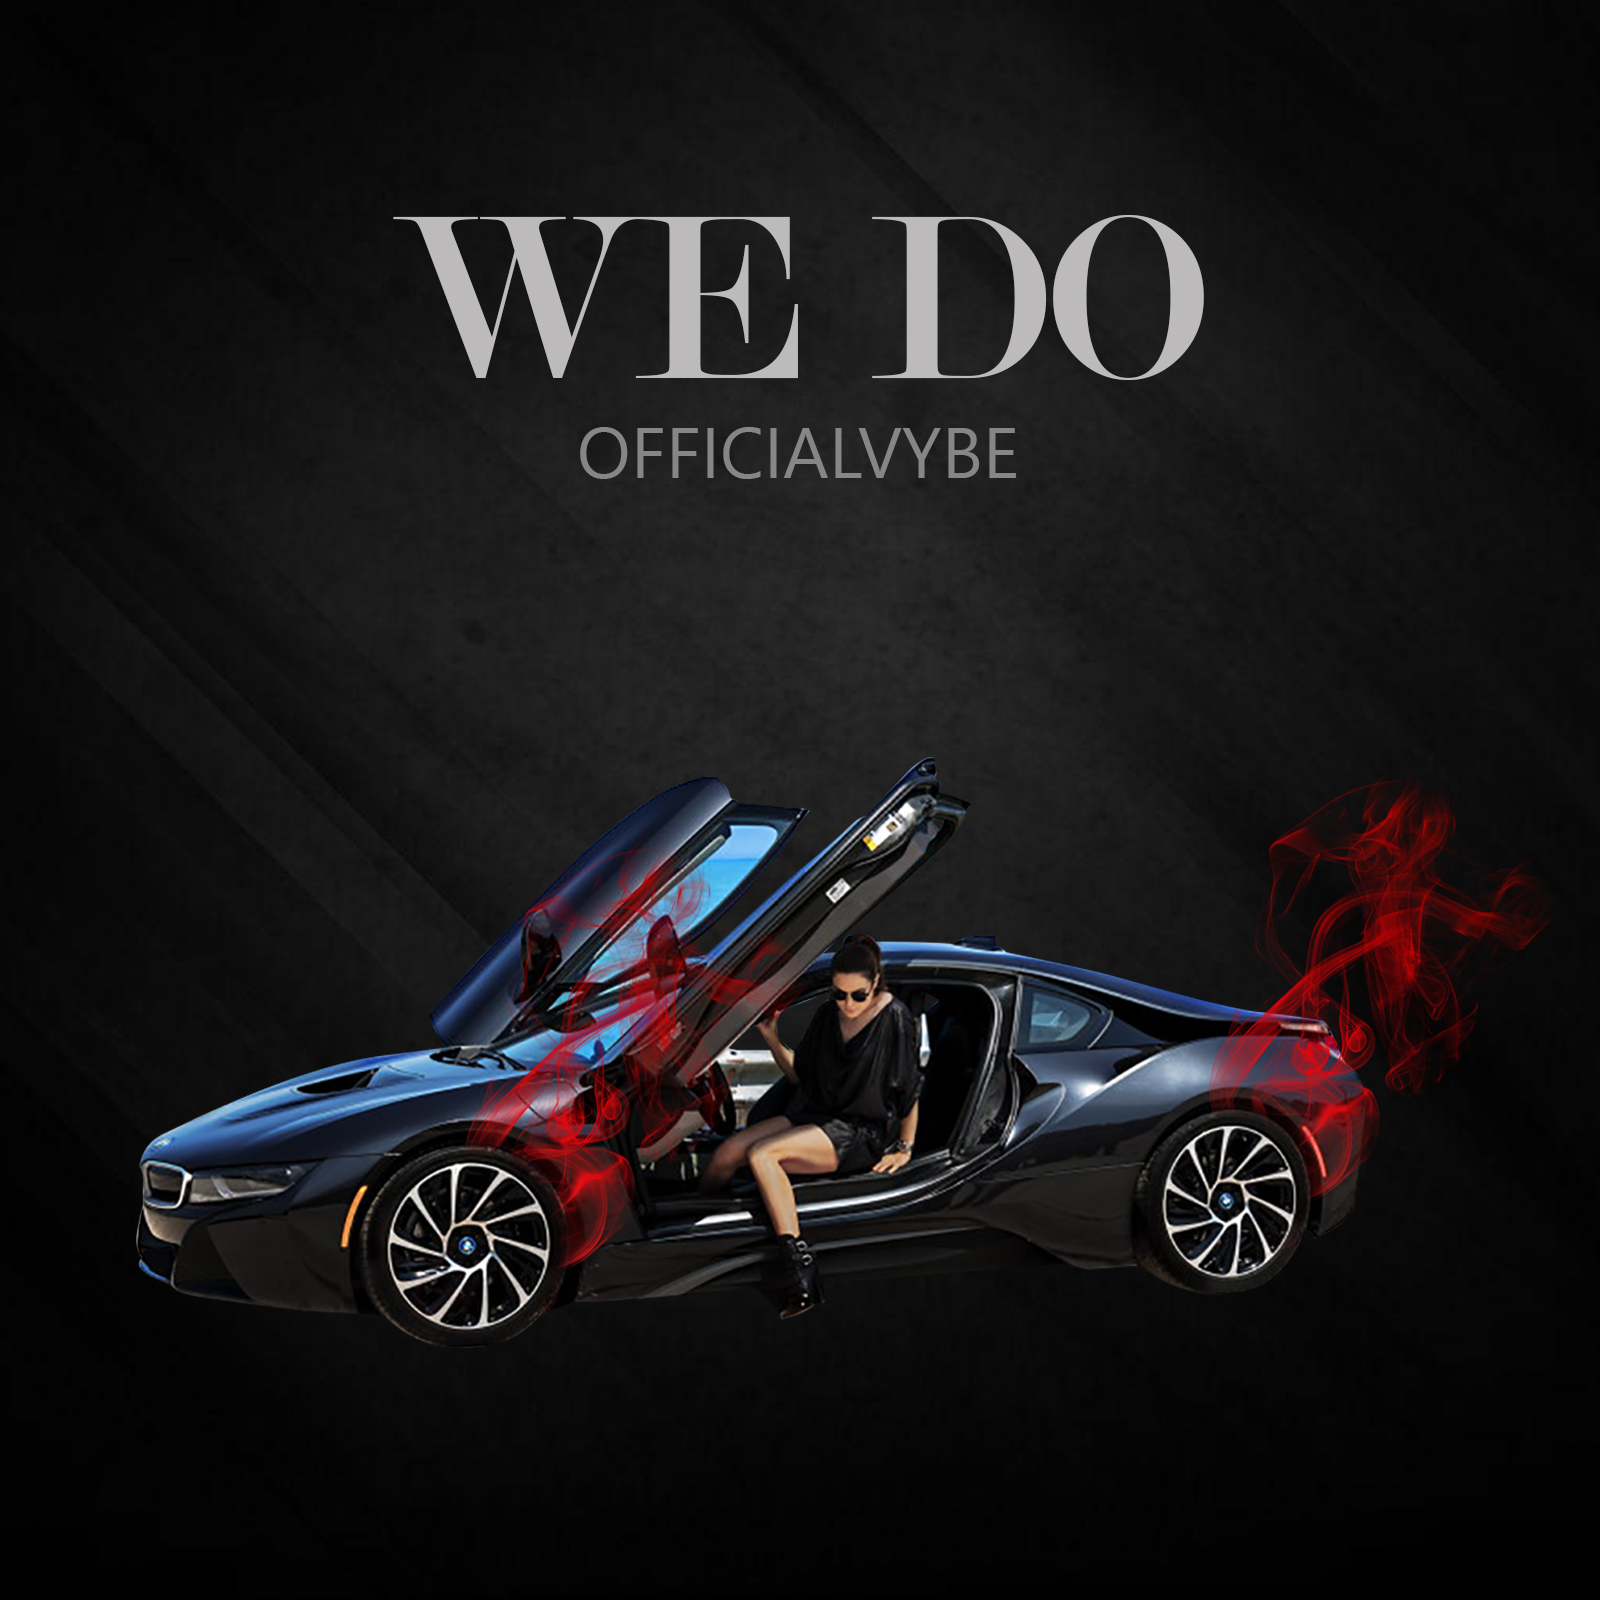 officialvybe - We Do